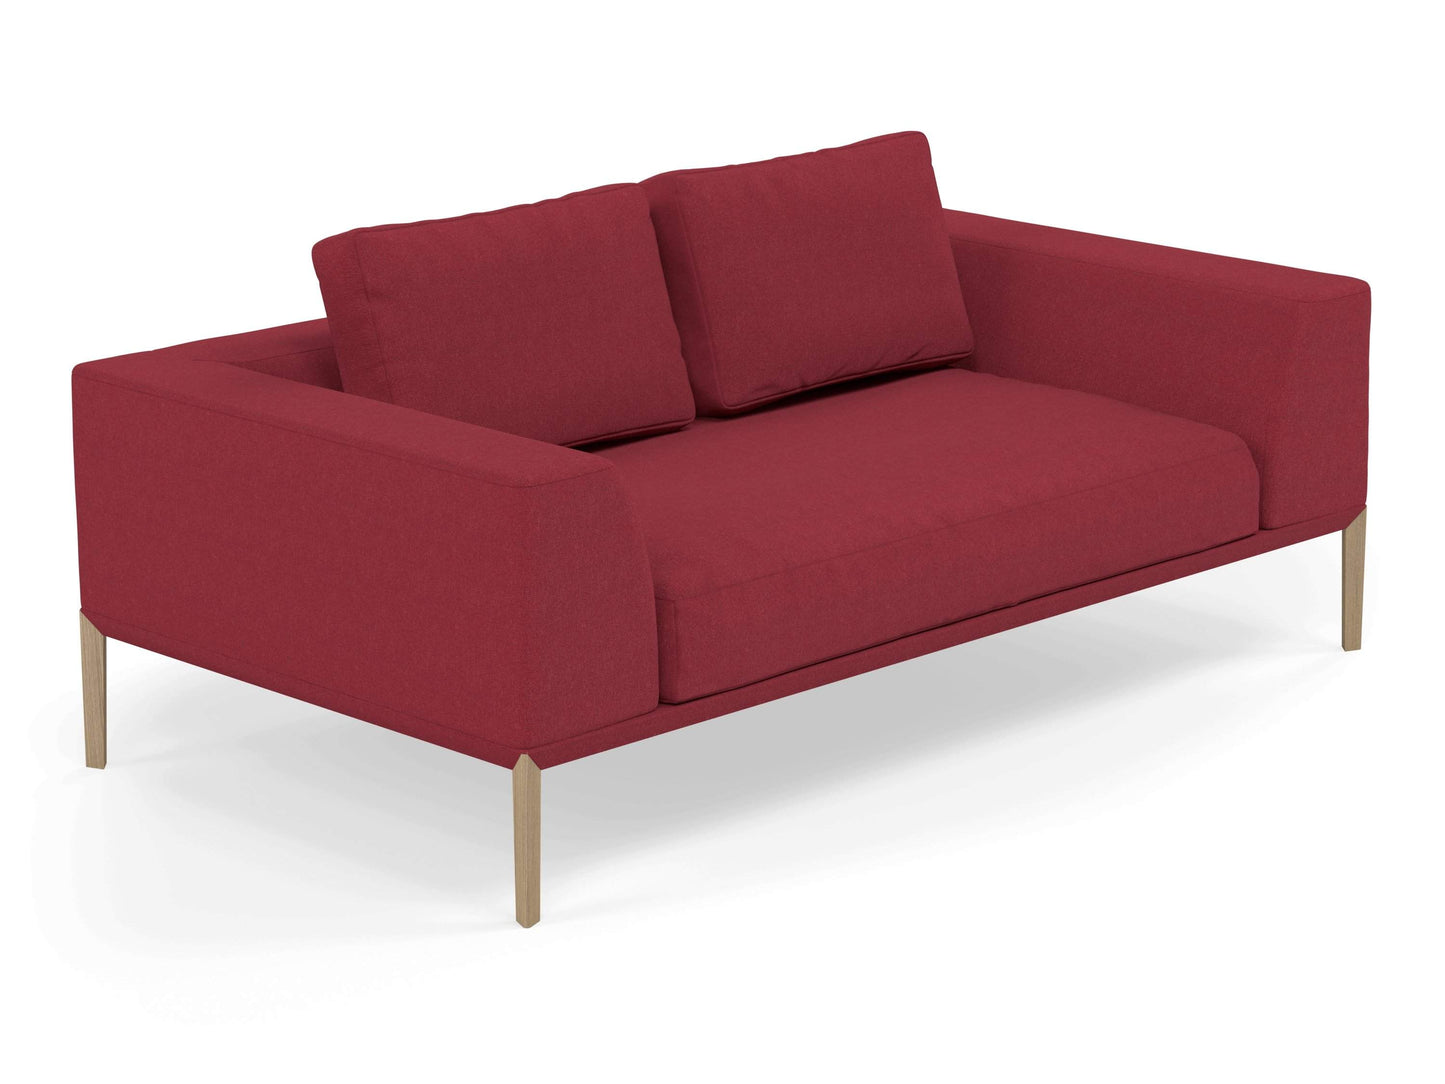 Modern 2 Seater Sofa with 2 Armrests in Rasberry Red Fabric-Distinct Designs (London) Ltd